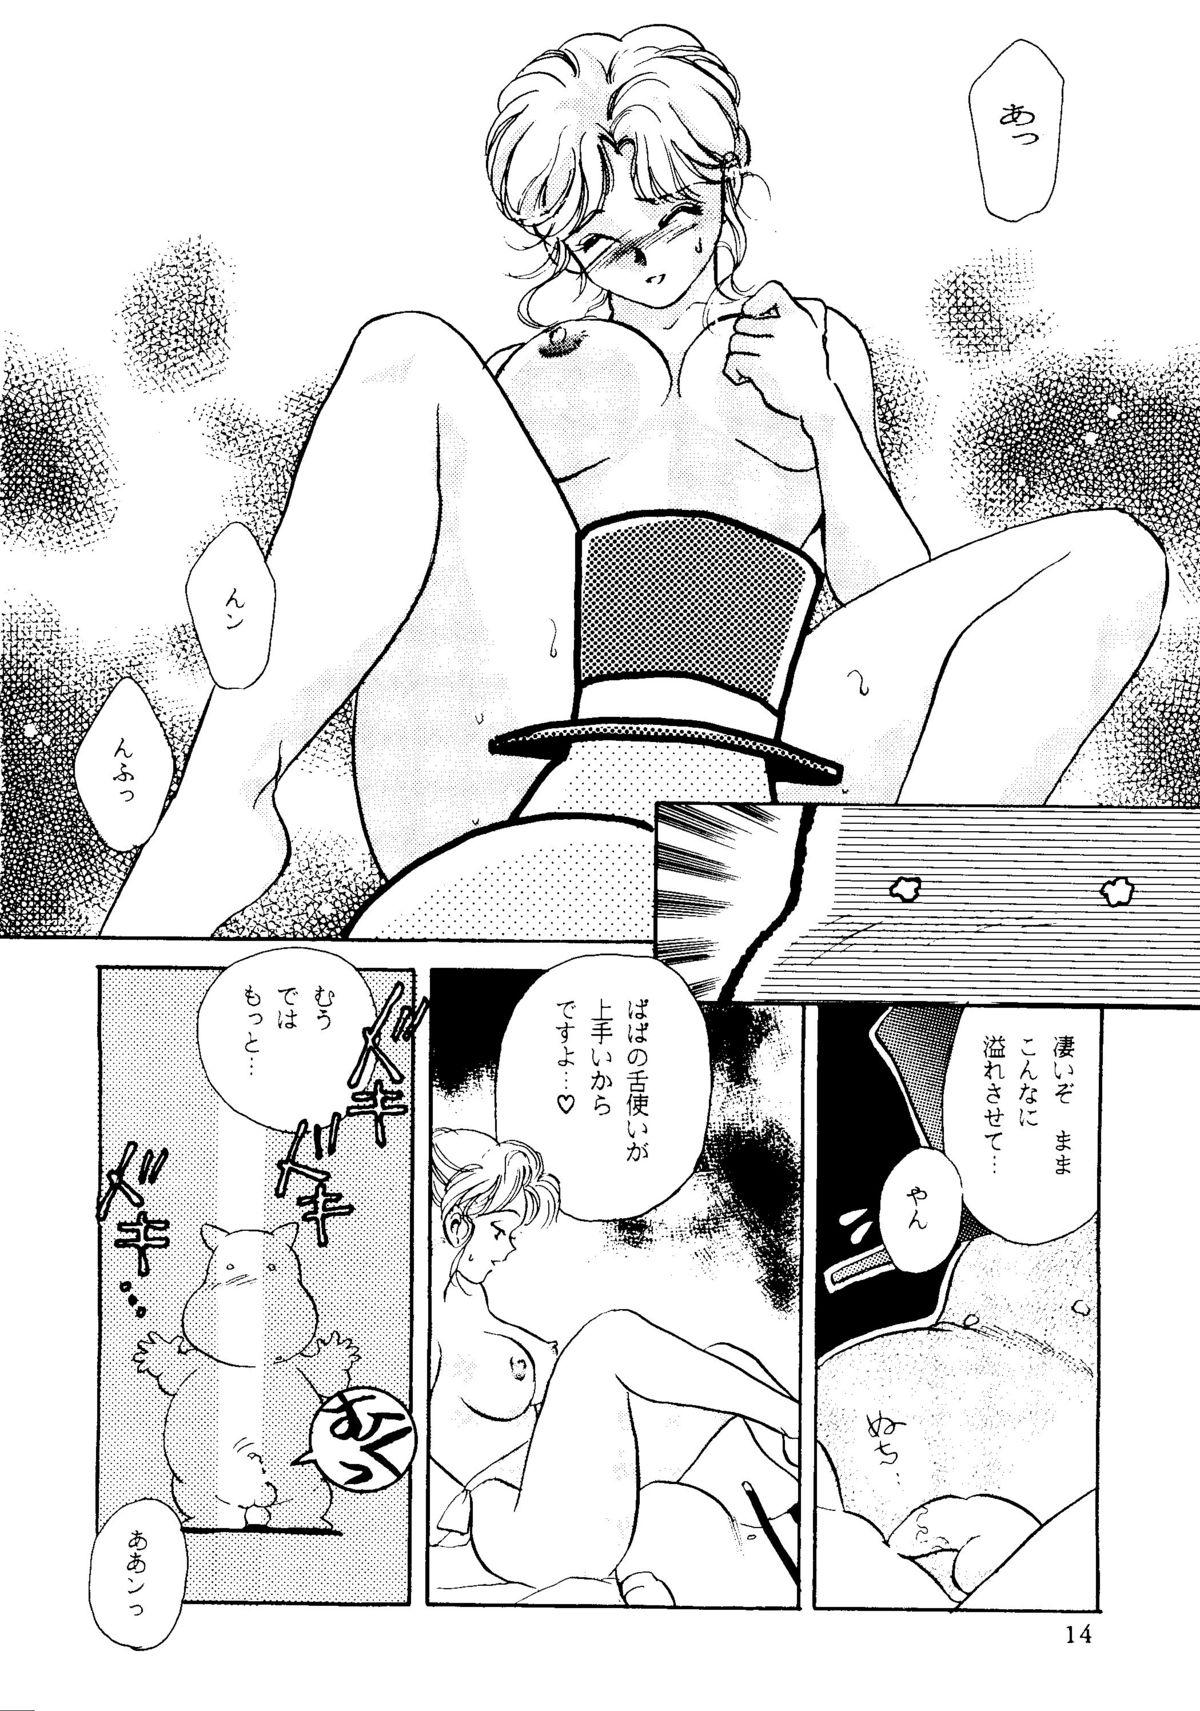 Bedroom R KIDS! Vol. 8 - Sailor moon Street fighter Tenchi muyo Red baron Her - Page 10